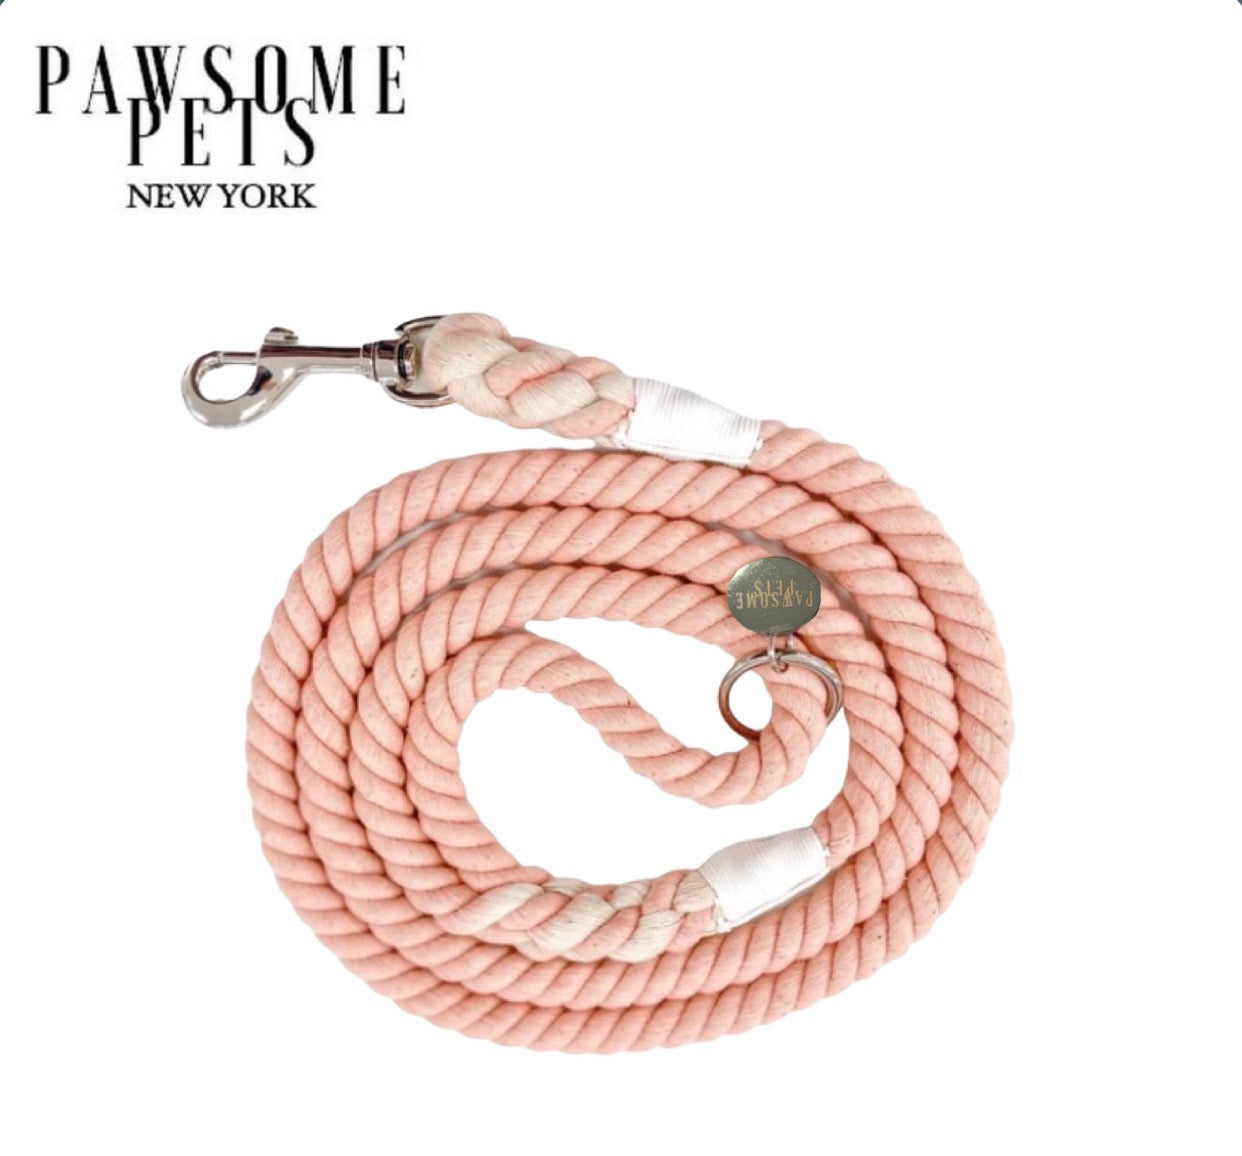 ROPE LEASH -  LIGHT CORAL PINK by Pawsome Pets